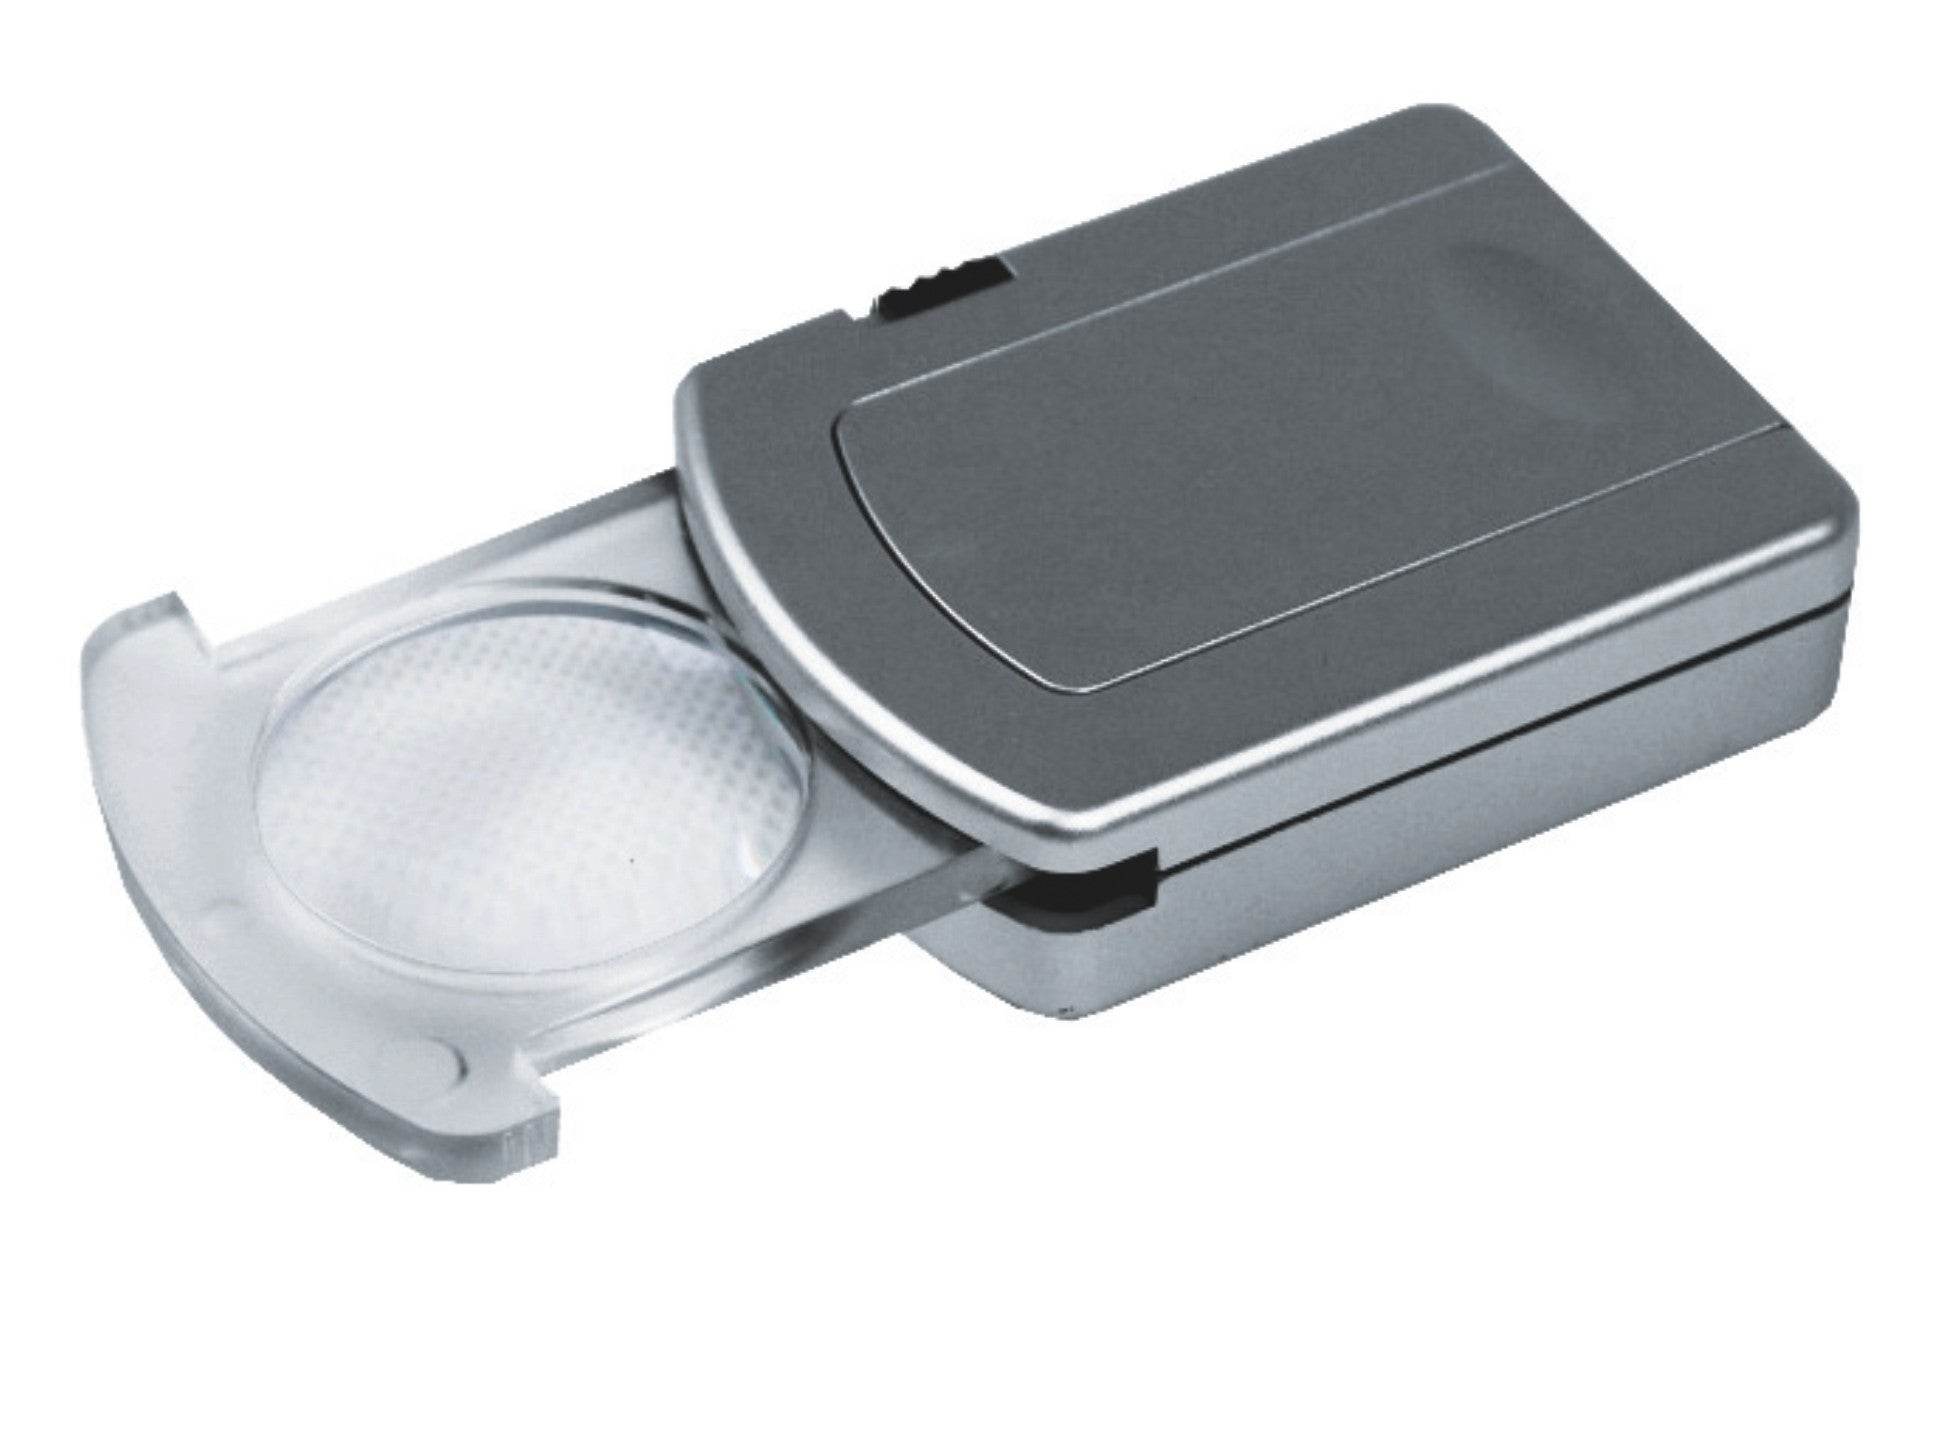 Silver double magnifier with light